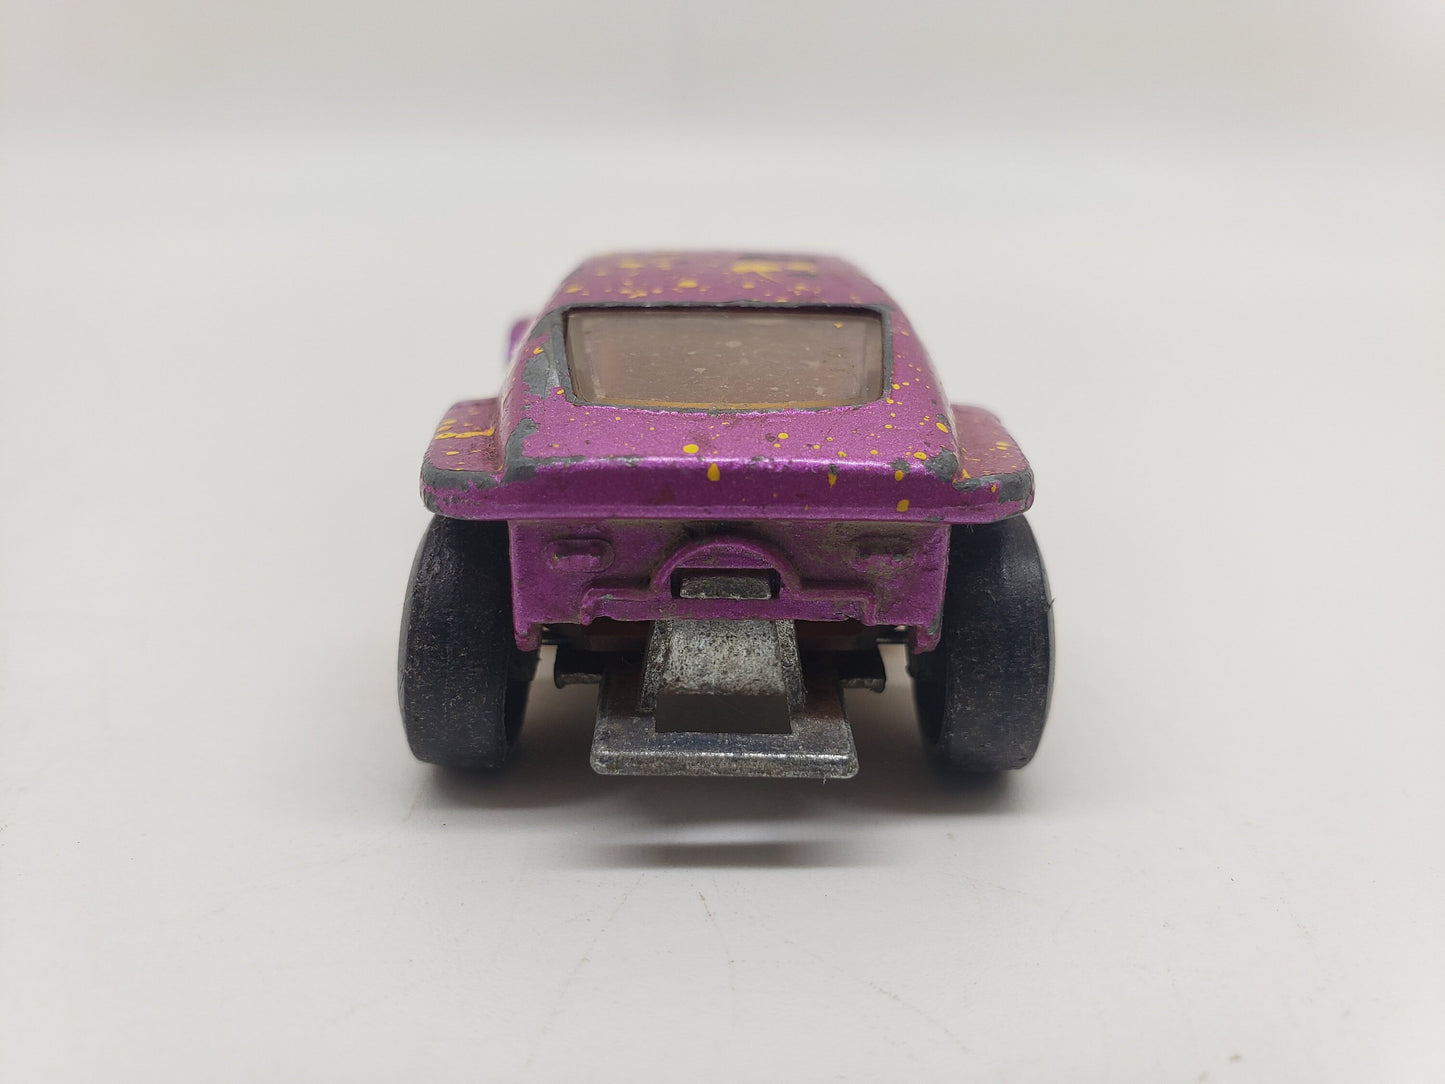 Matchbox 1971 Beach Buggy Metallic Pink Superfast Collectable Scale Model Miniature Toy Car Perfect Birthday Gift